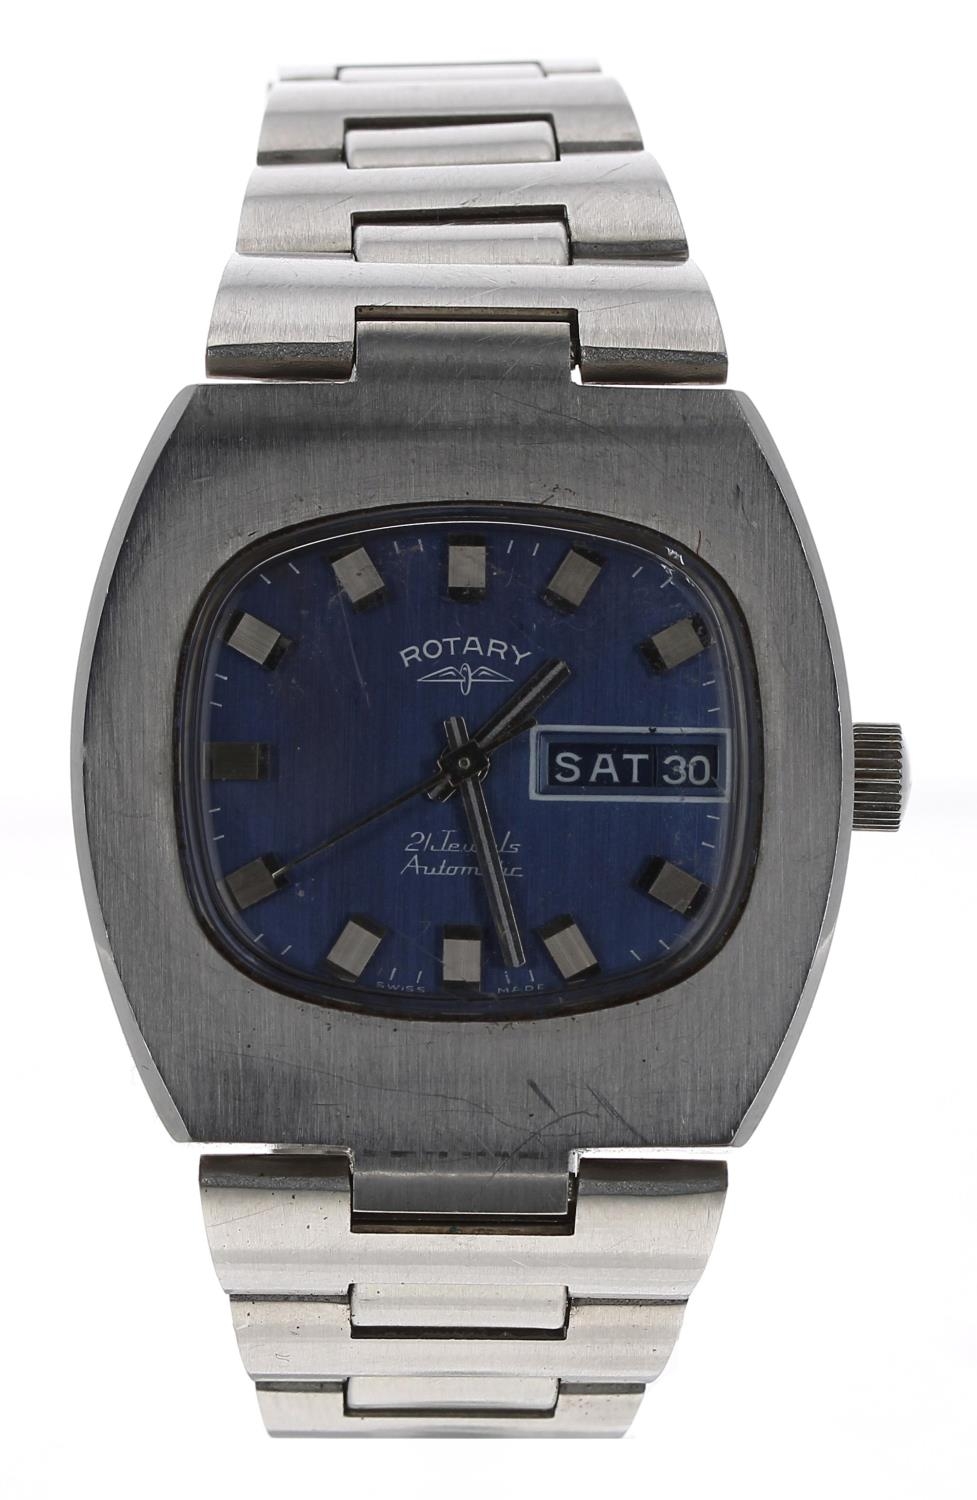 Rotary automatic stainless steel gentleman's wristwatch, squared blue dial with applied hour